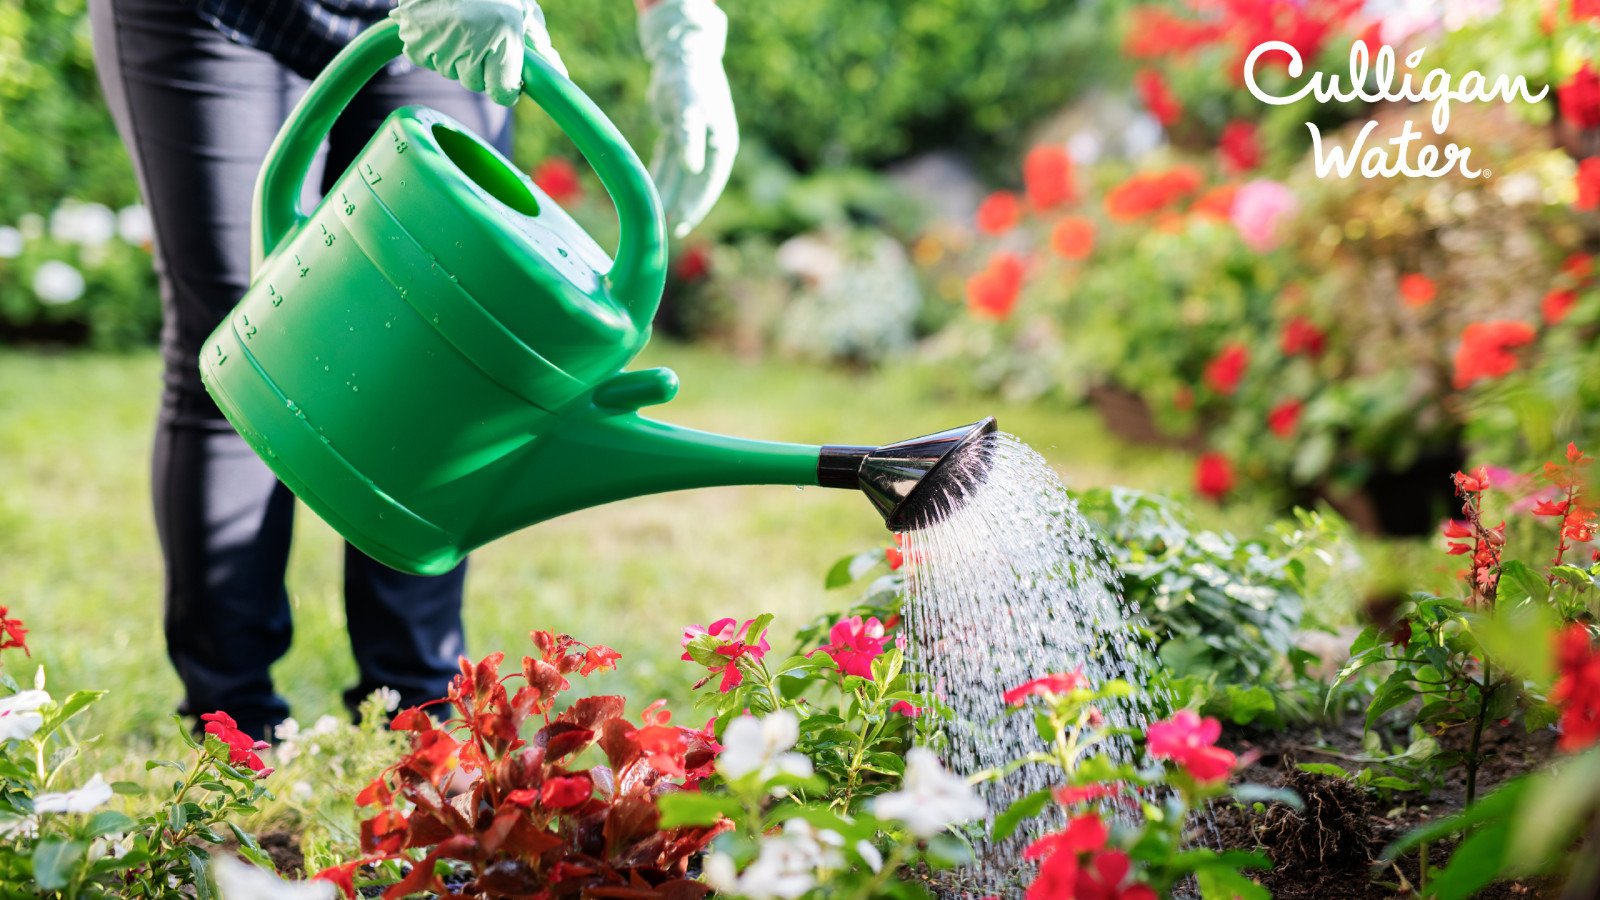 Person watering plants in a garden with green watering can